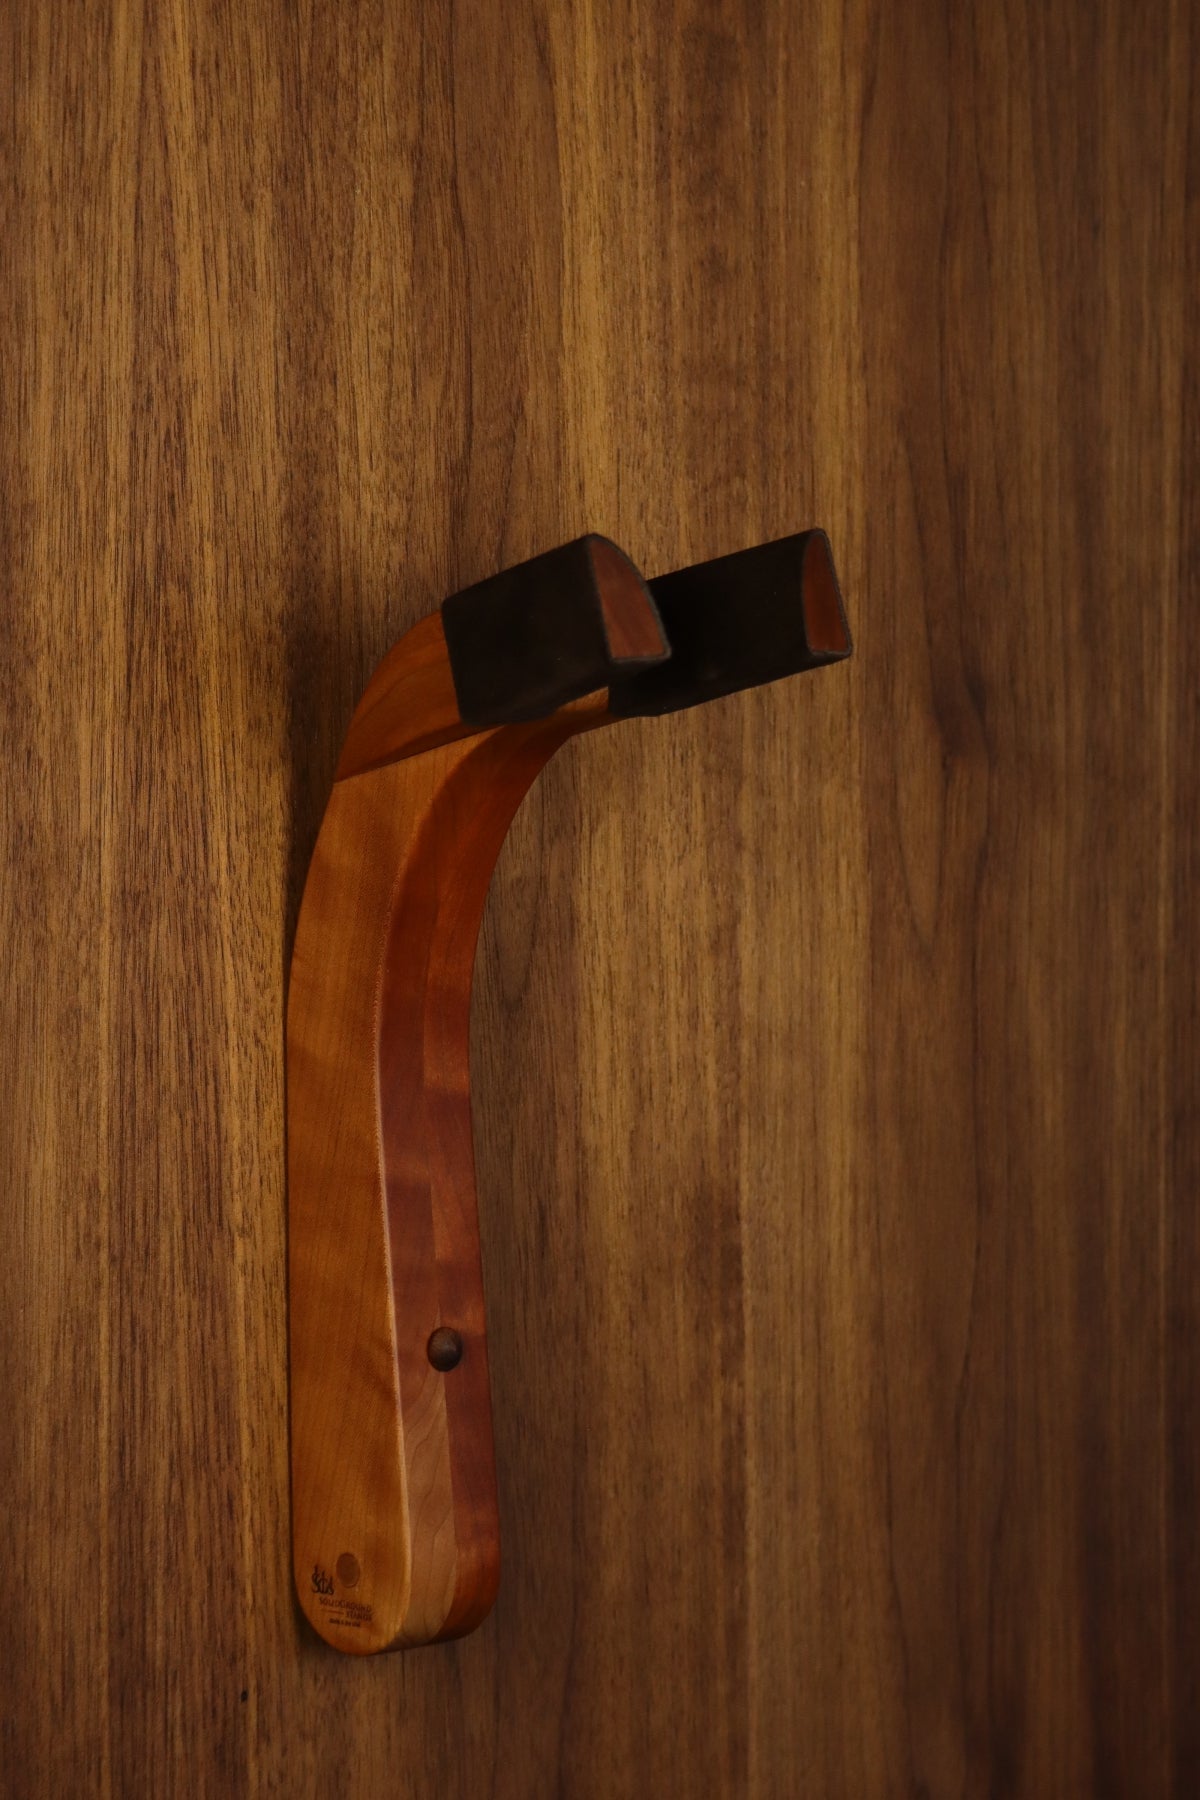 Cherry wood guitar wall mount hanger installed on paneled wall